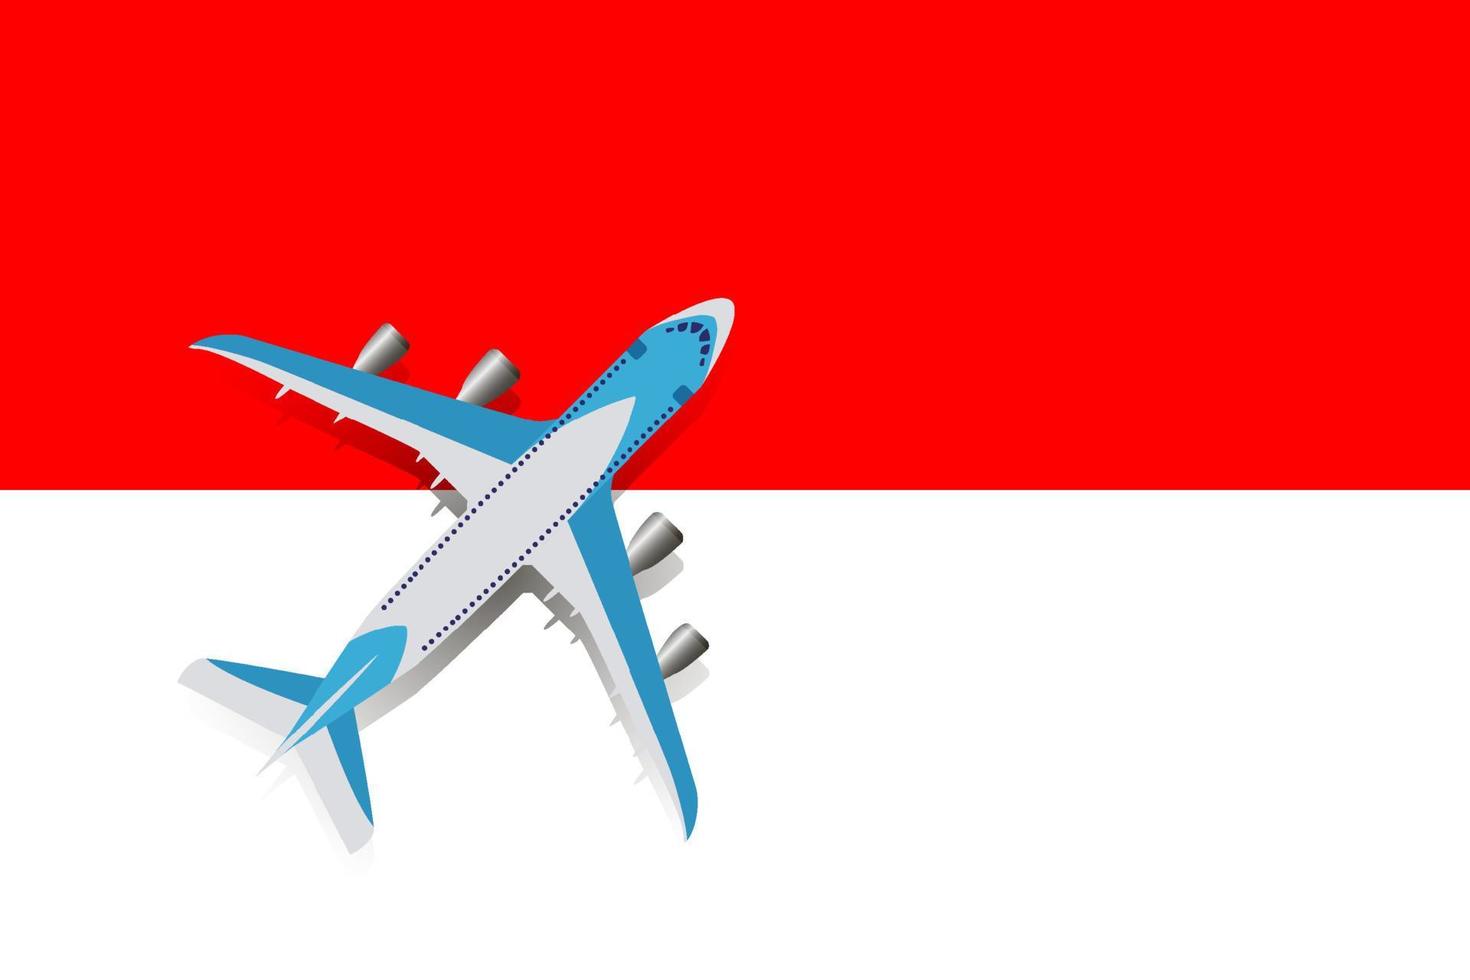 Vector Illustration of a passenger plane flying over the flag of Indonesia. Concept of tourism and travel